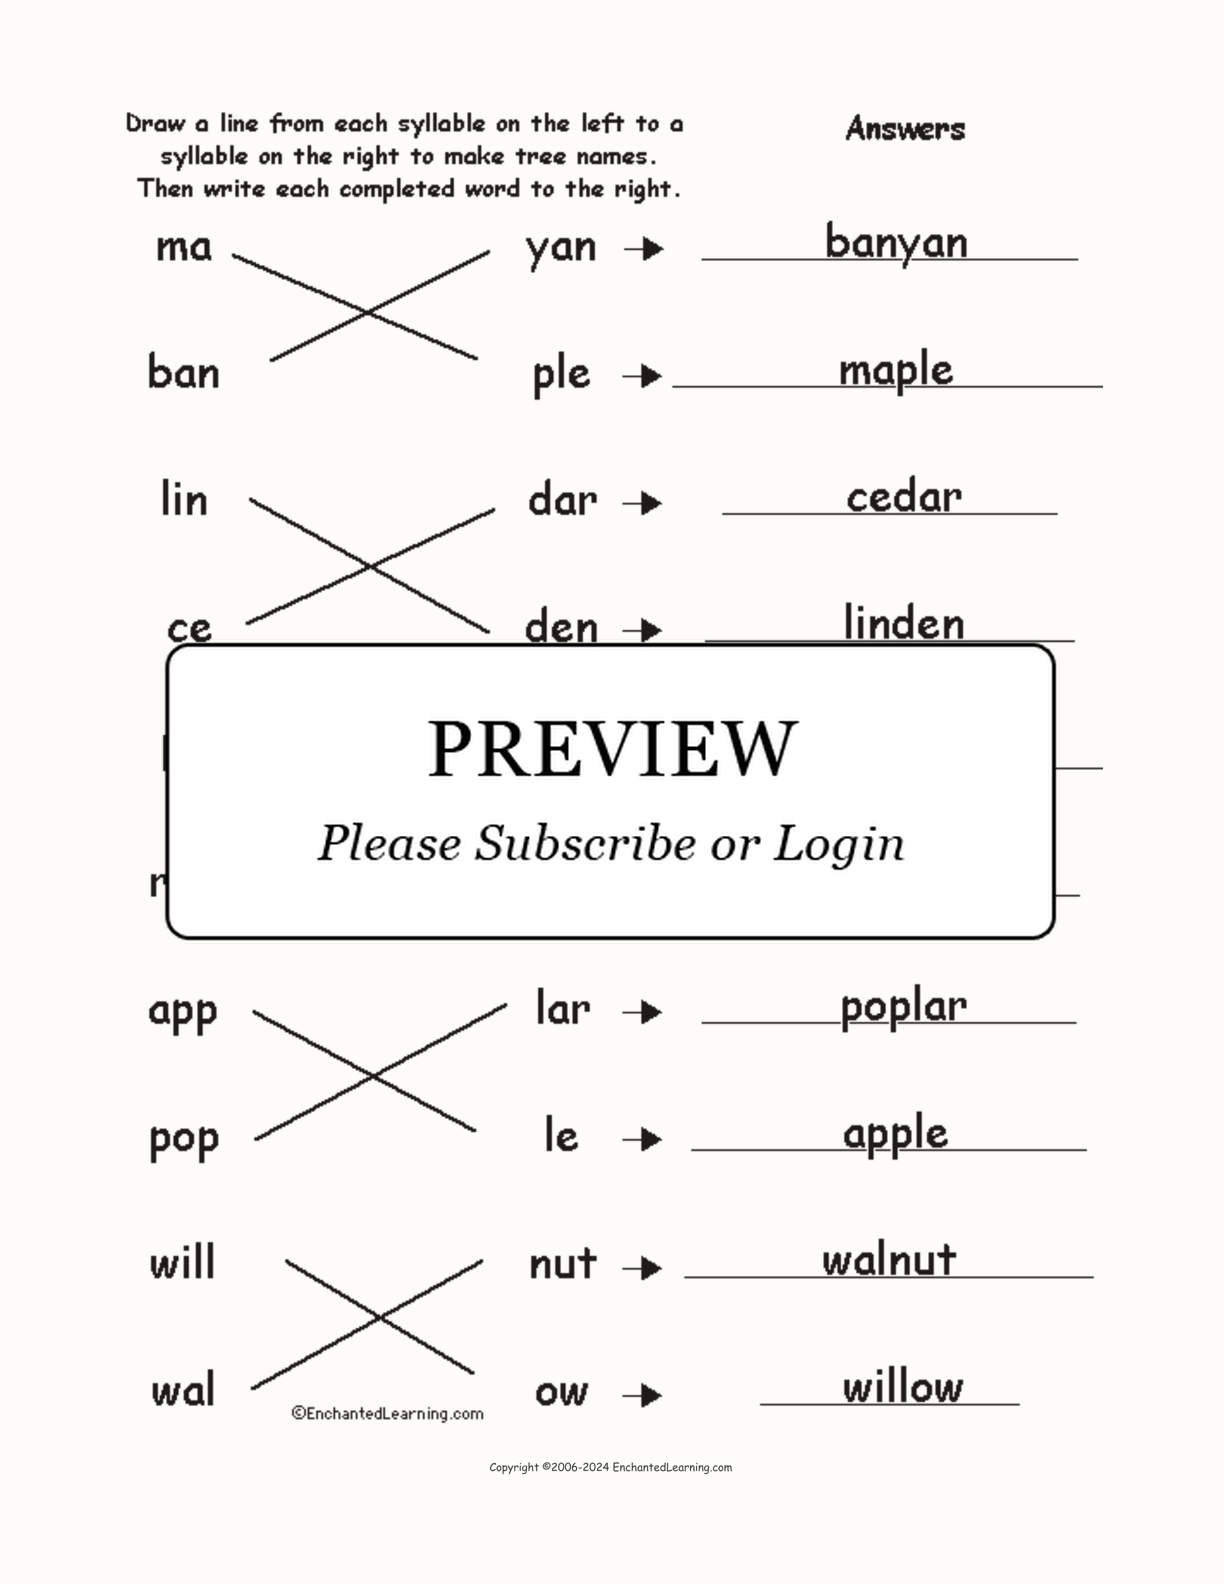 Match the Syllables: Tree Words interactive worksheet page 2